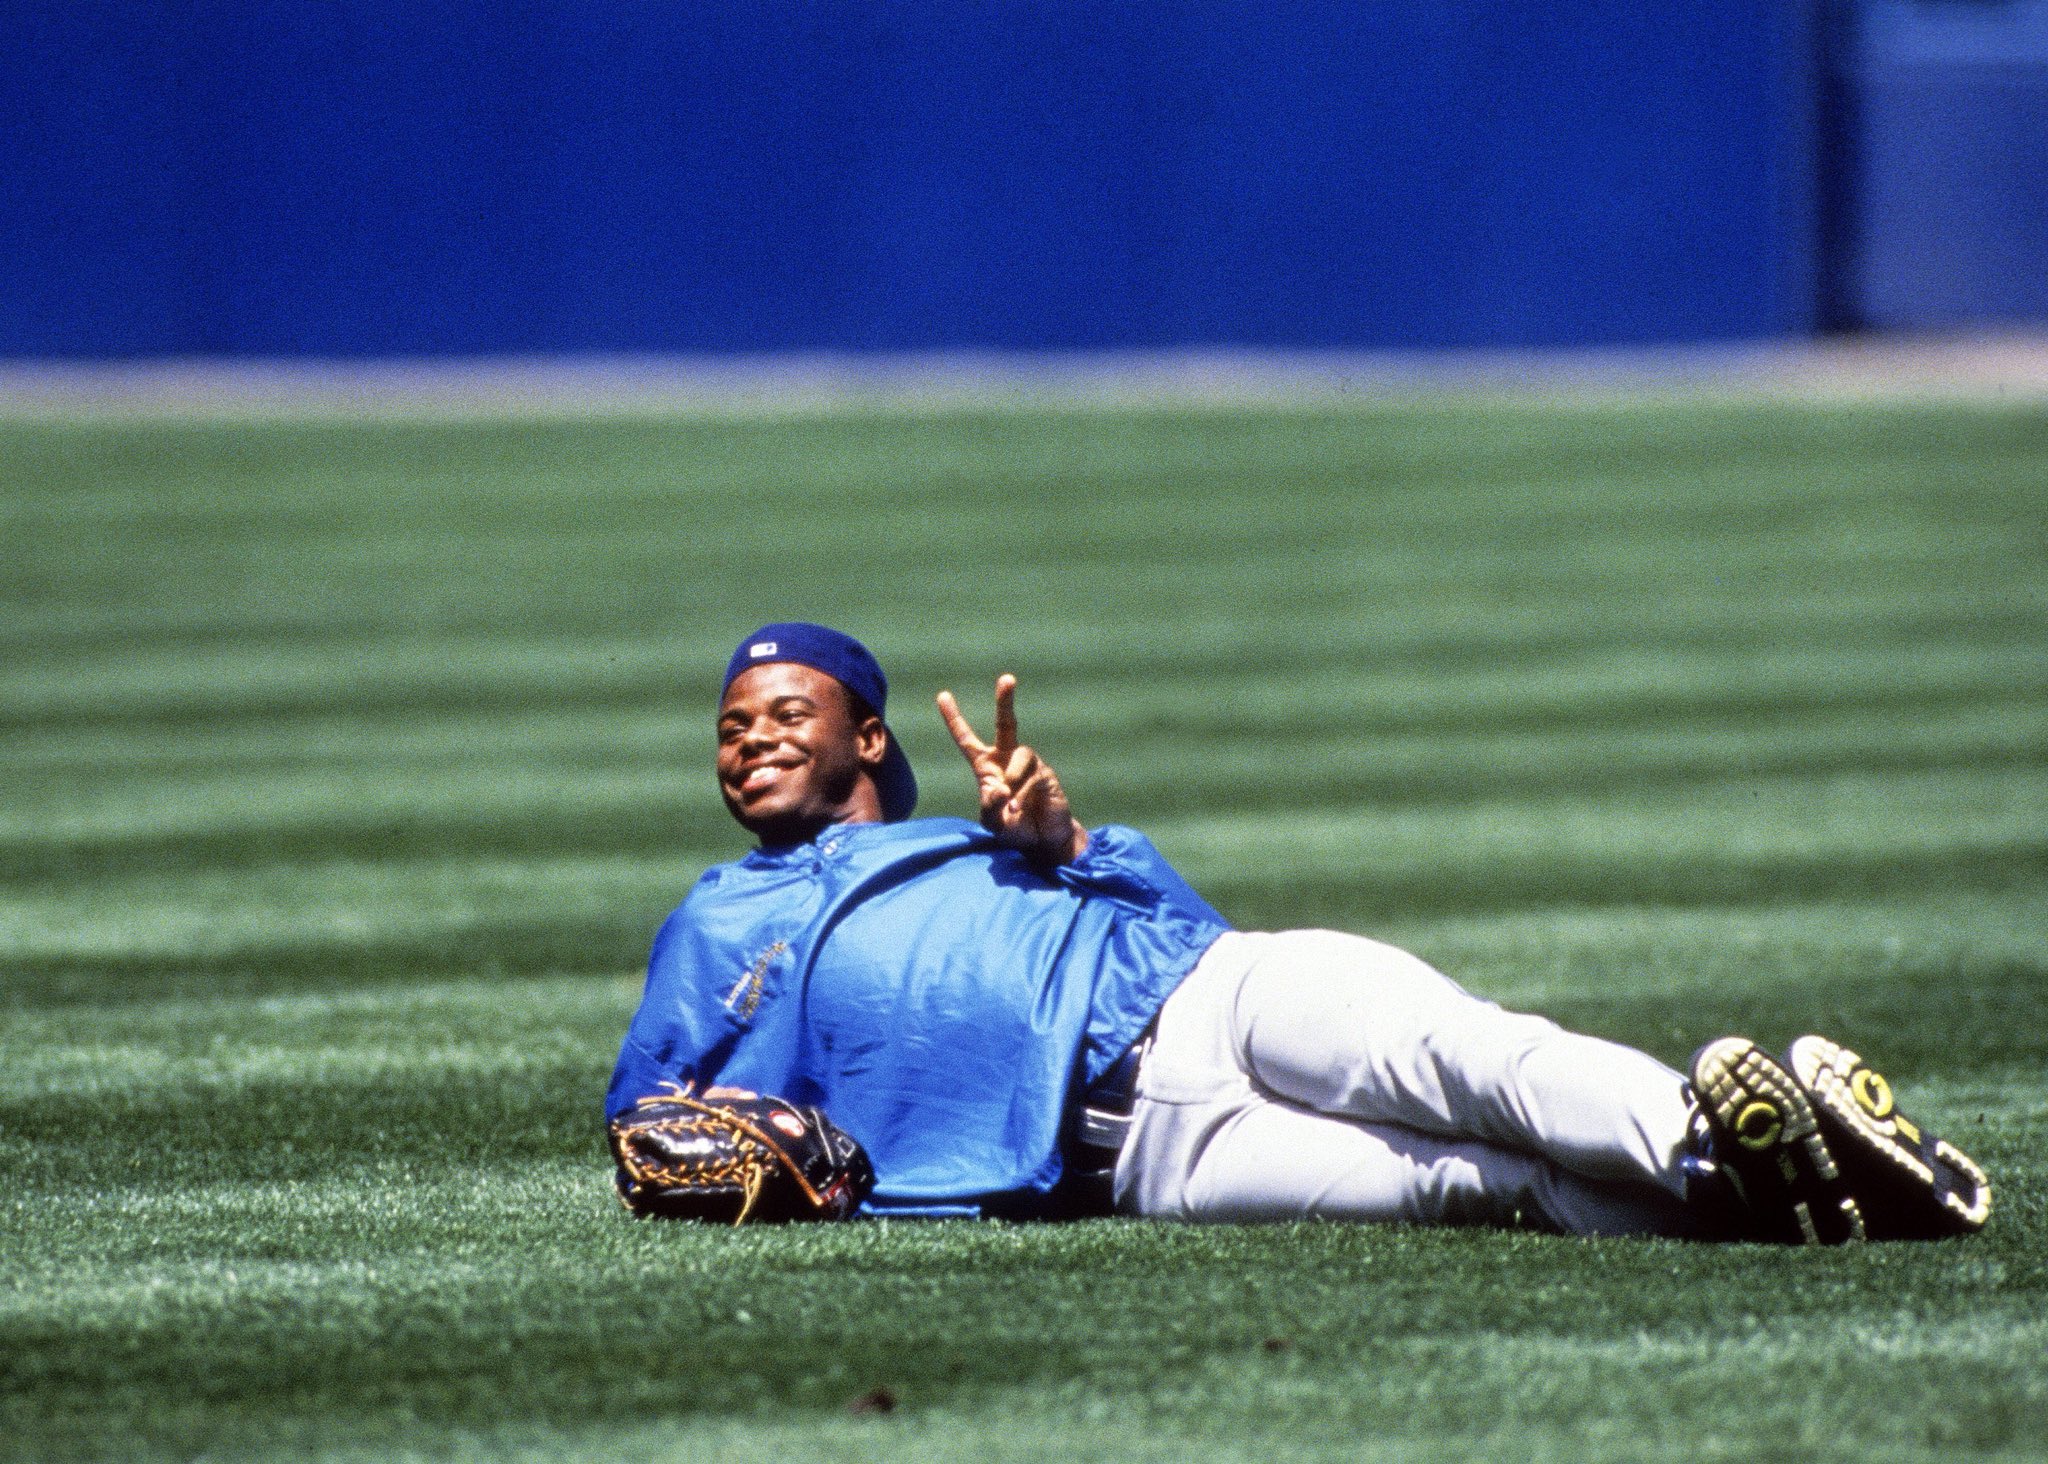 A very Happy 48th Birthday to former centerfielder/current Hall of Famer, Ken Griffey, Jr!  